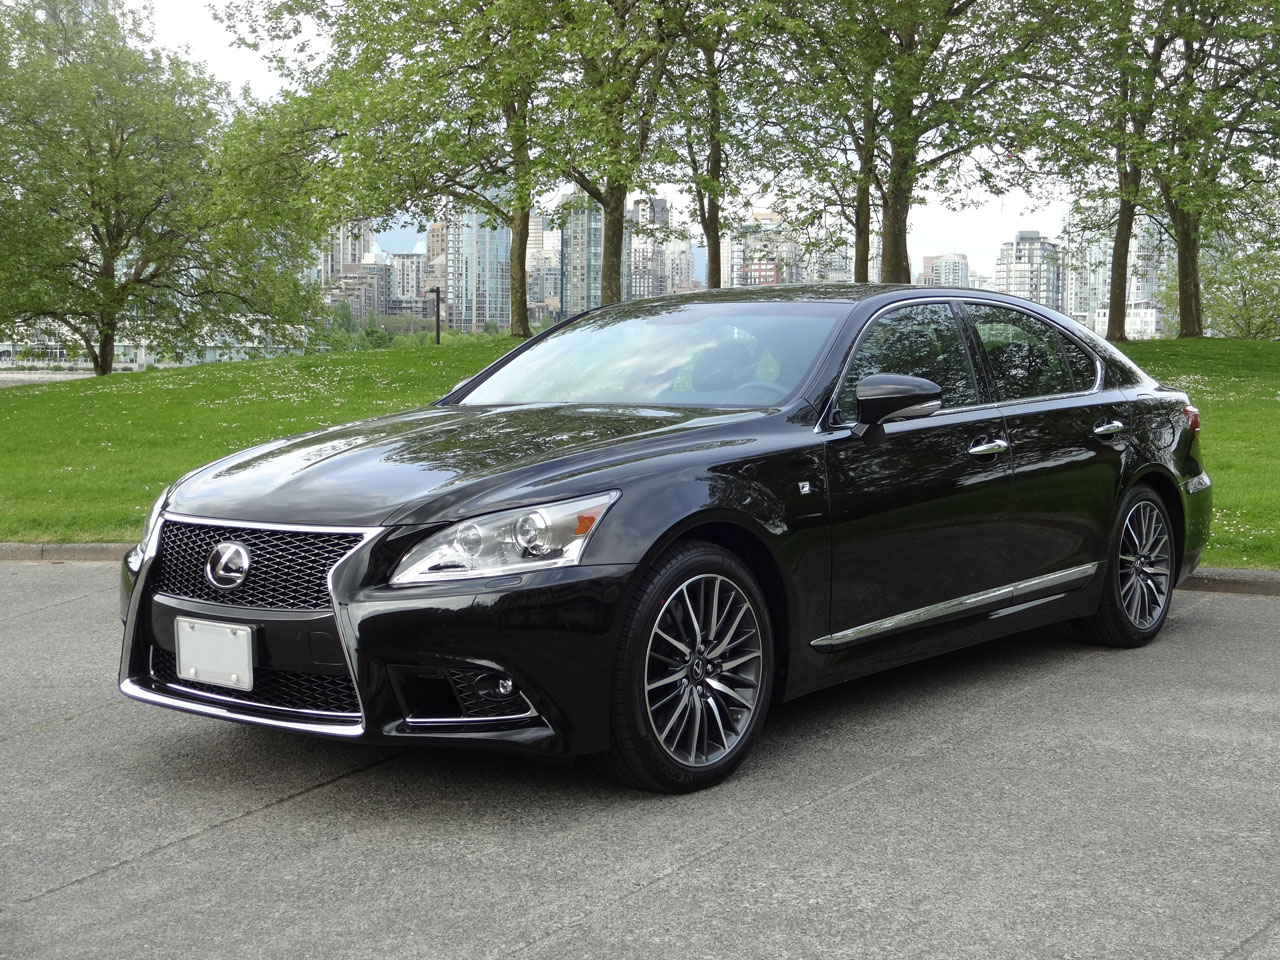 2014 Lexus LS 460 AWD FSport Road Test Review The Car